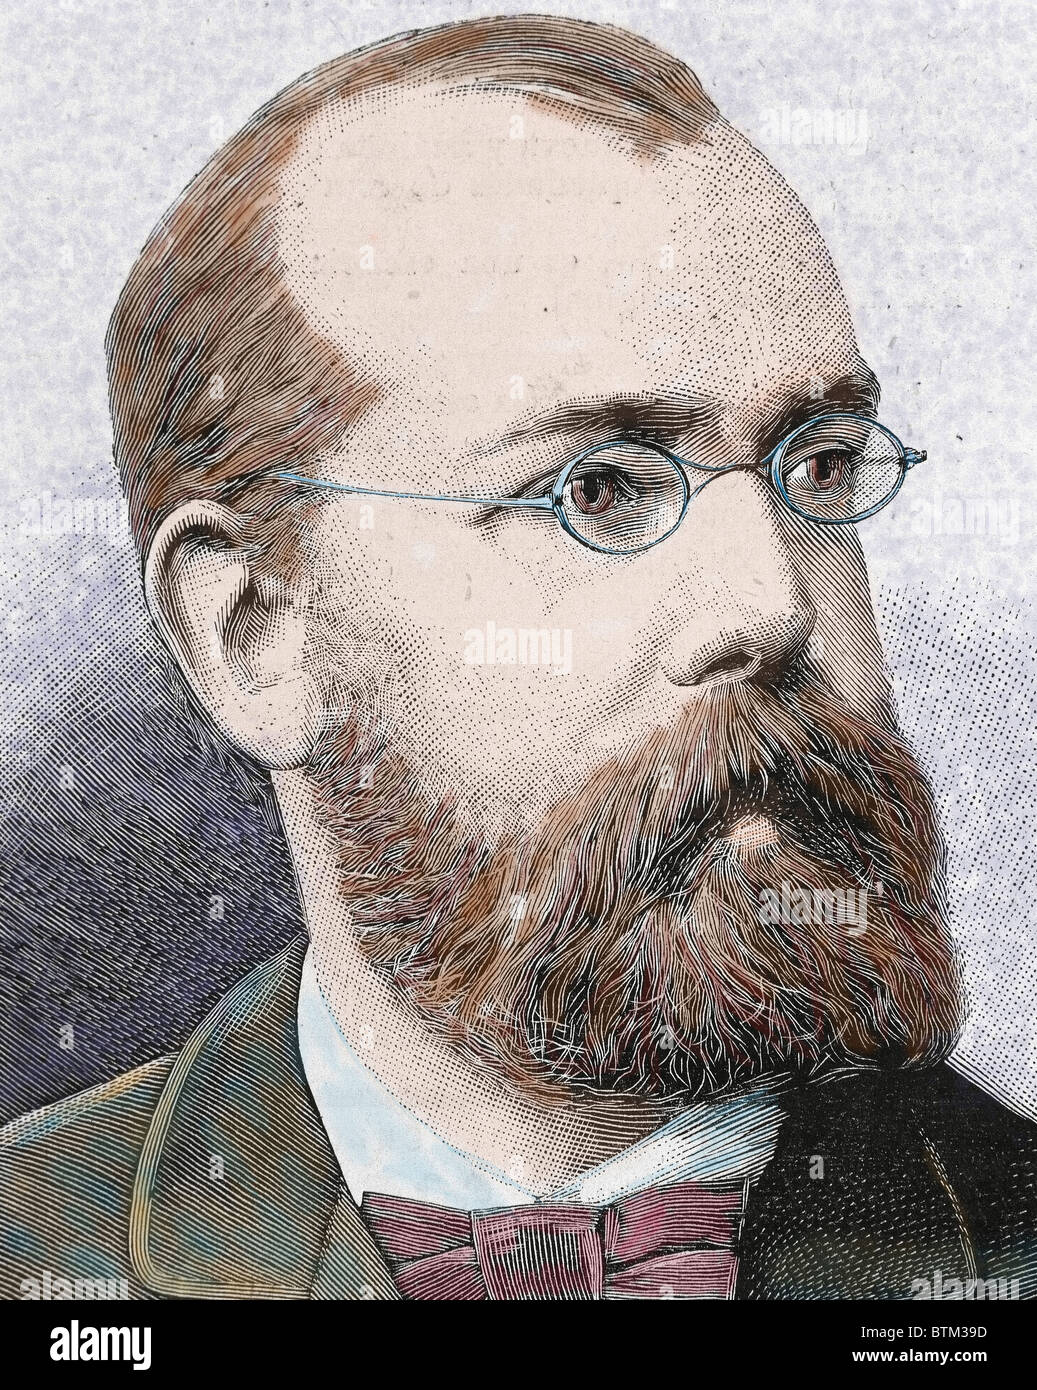 KOCH, Robert (1843-1910). German doctor. In 1882 discovered the bacillus of tuberculosis. Stock Photo